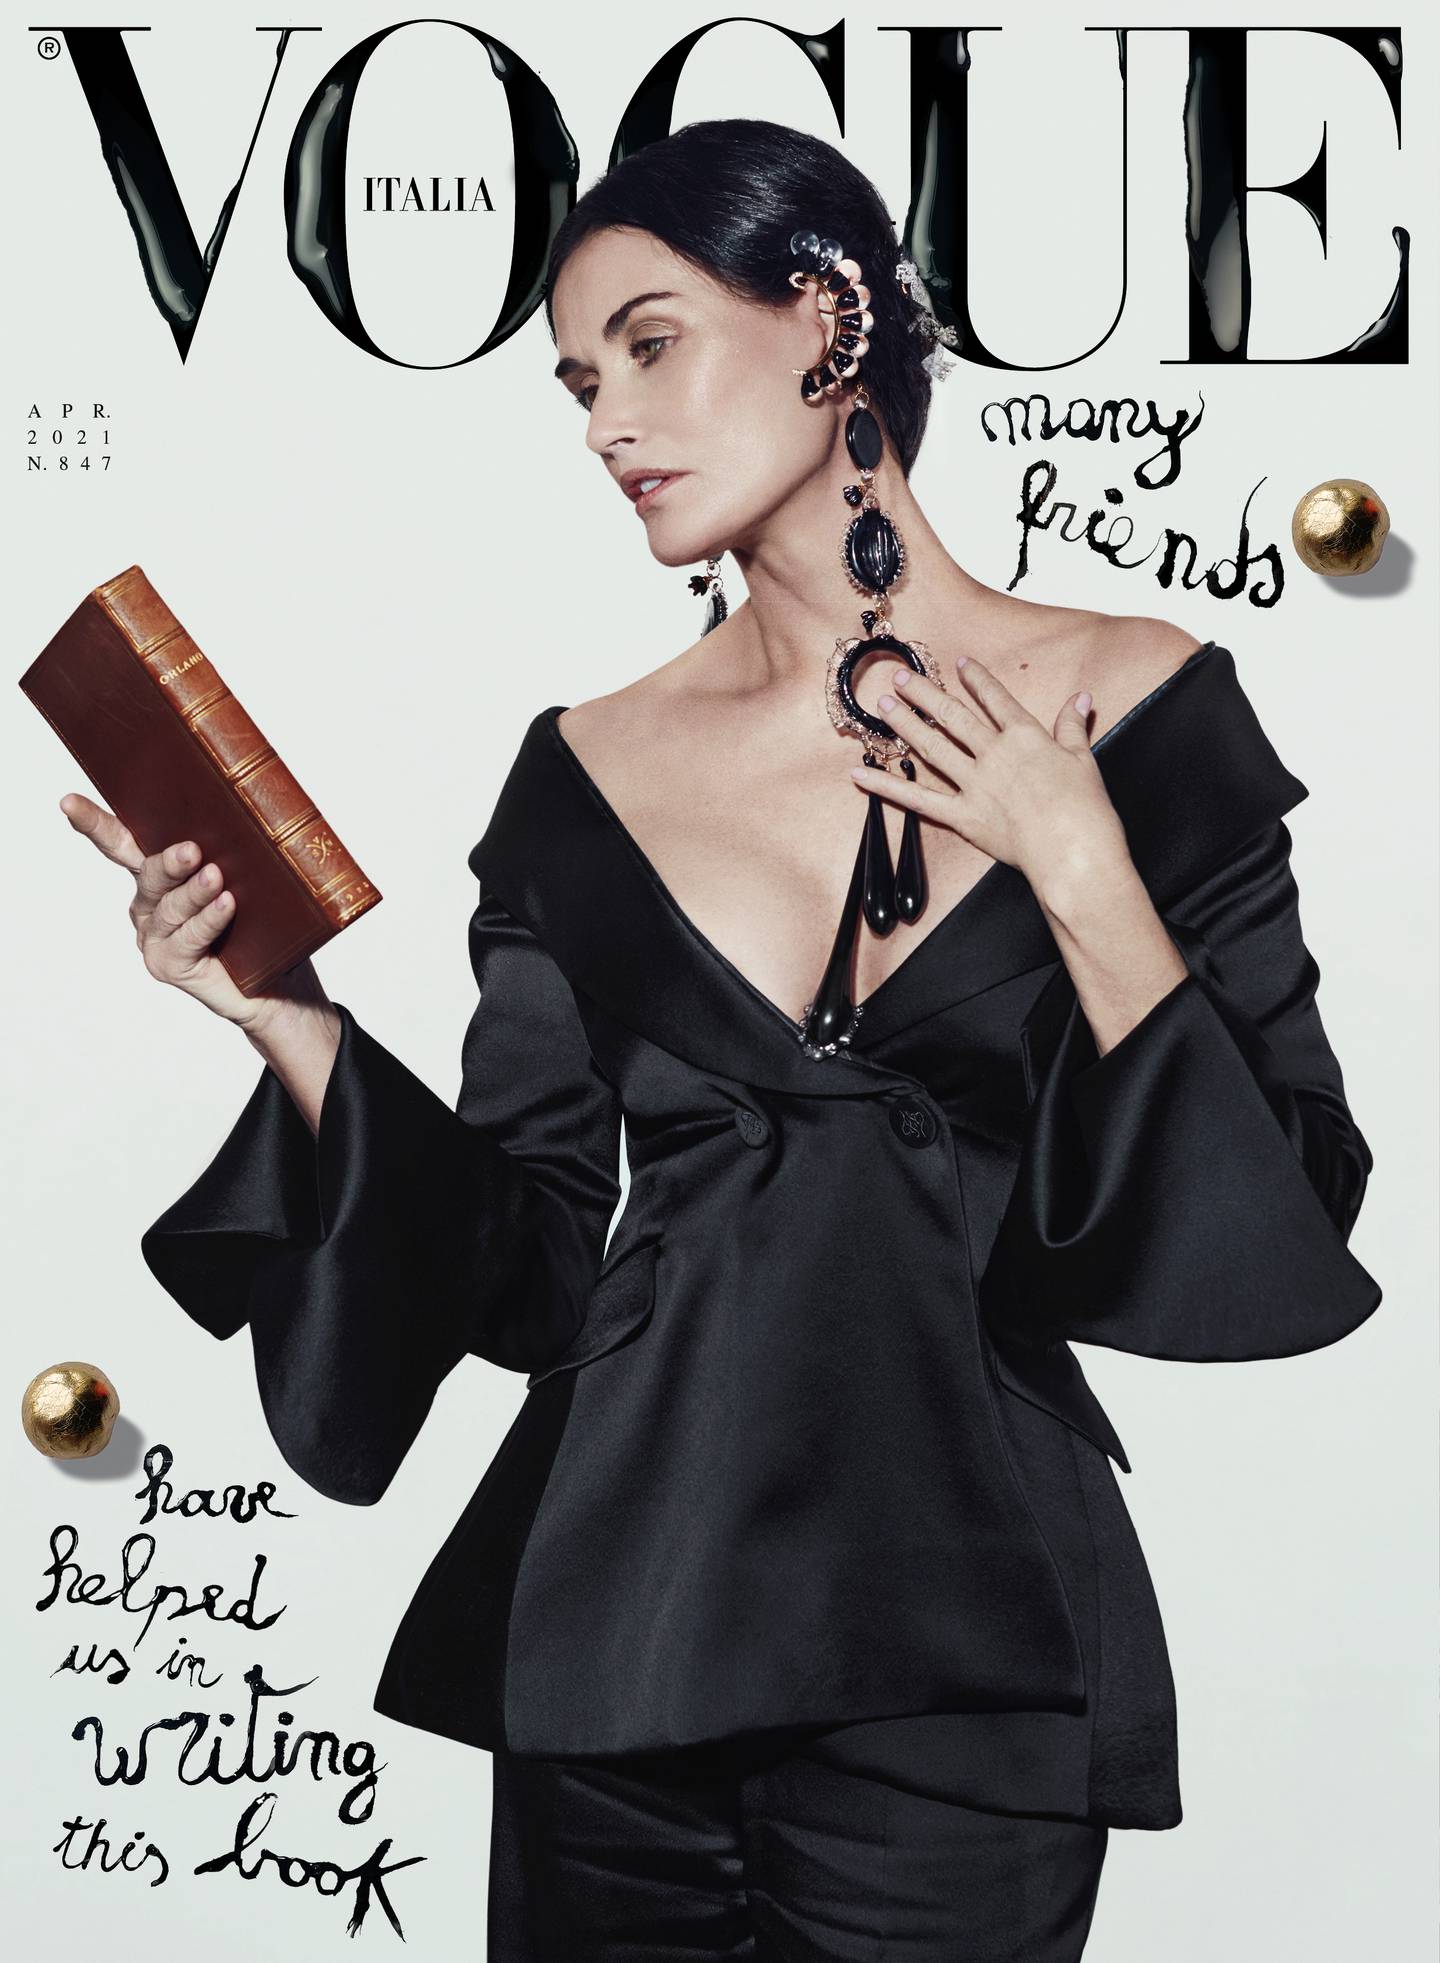 Demi Moore wearing Fendi photographed by Brett Lloyd for the cover of the April 2021 issue of Vogue Italia, guest edited by Kim Jones. Vogue Italia.